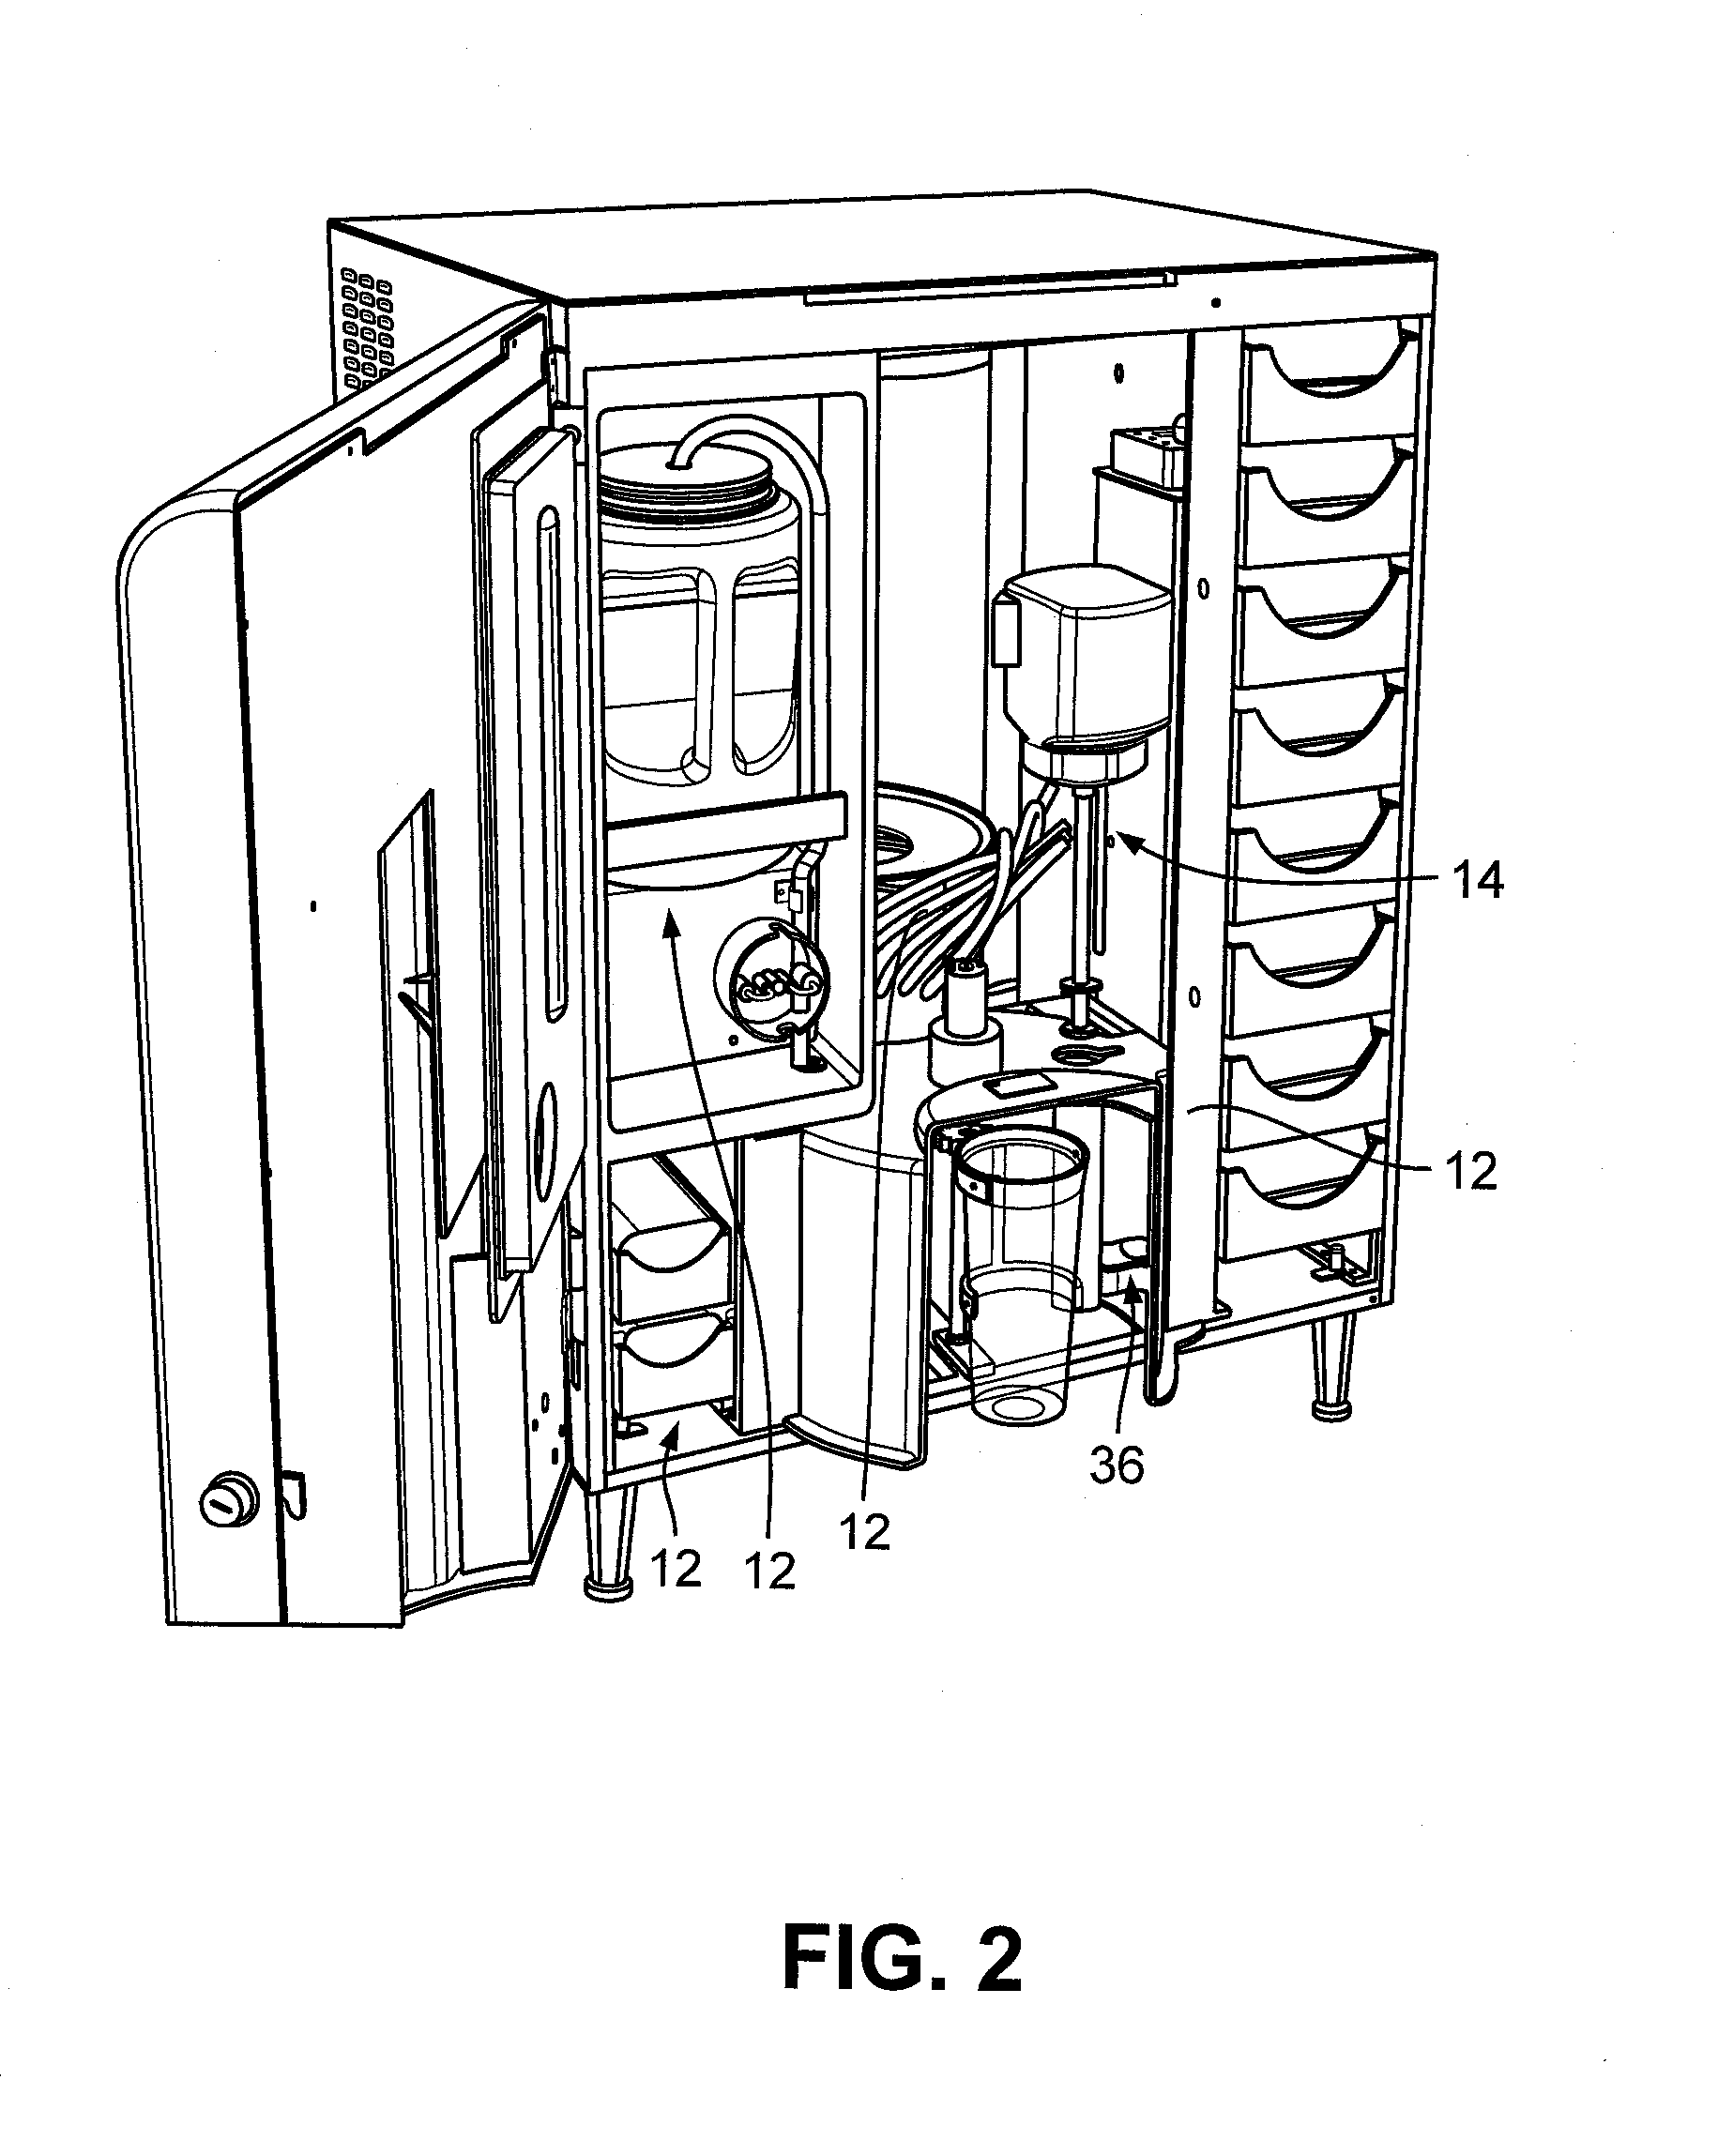 Apparatus and methods for producing beverages